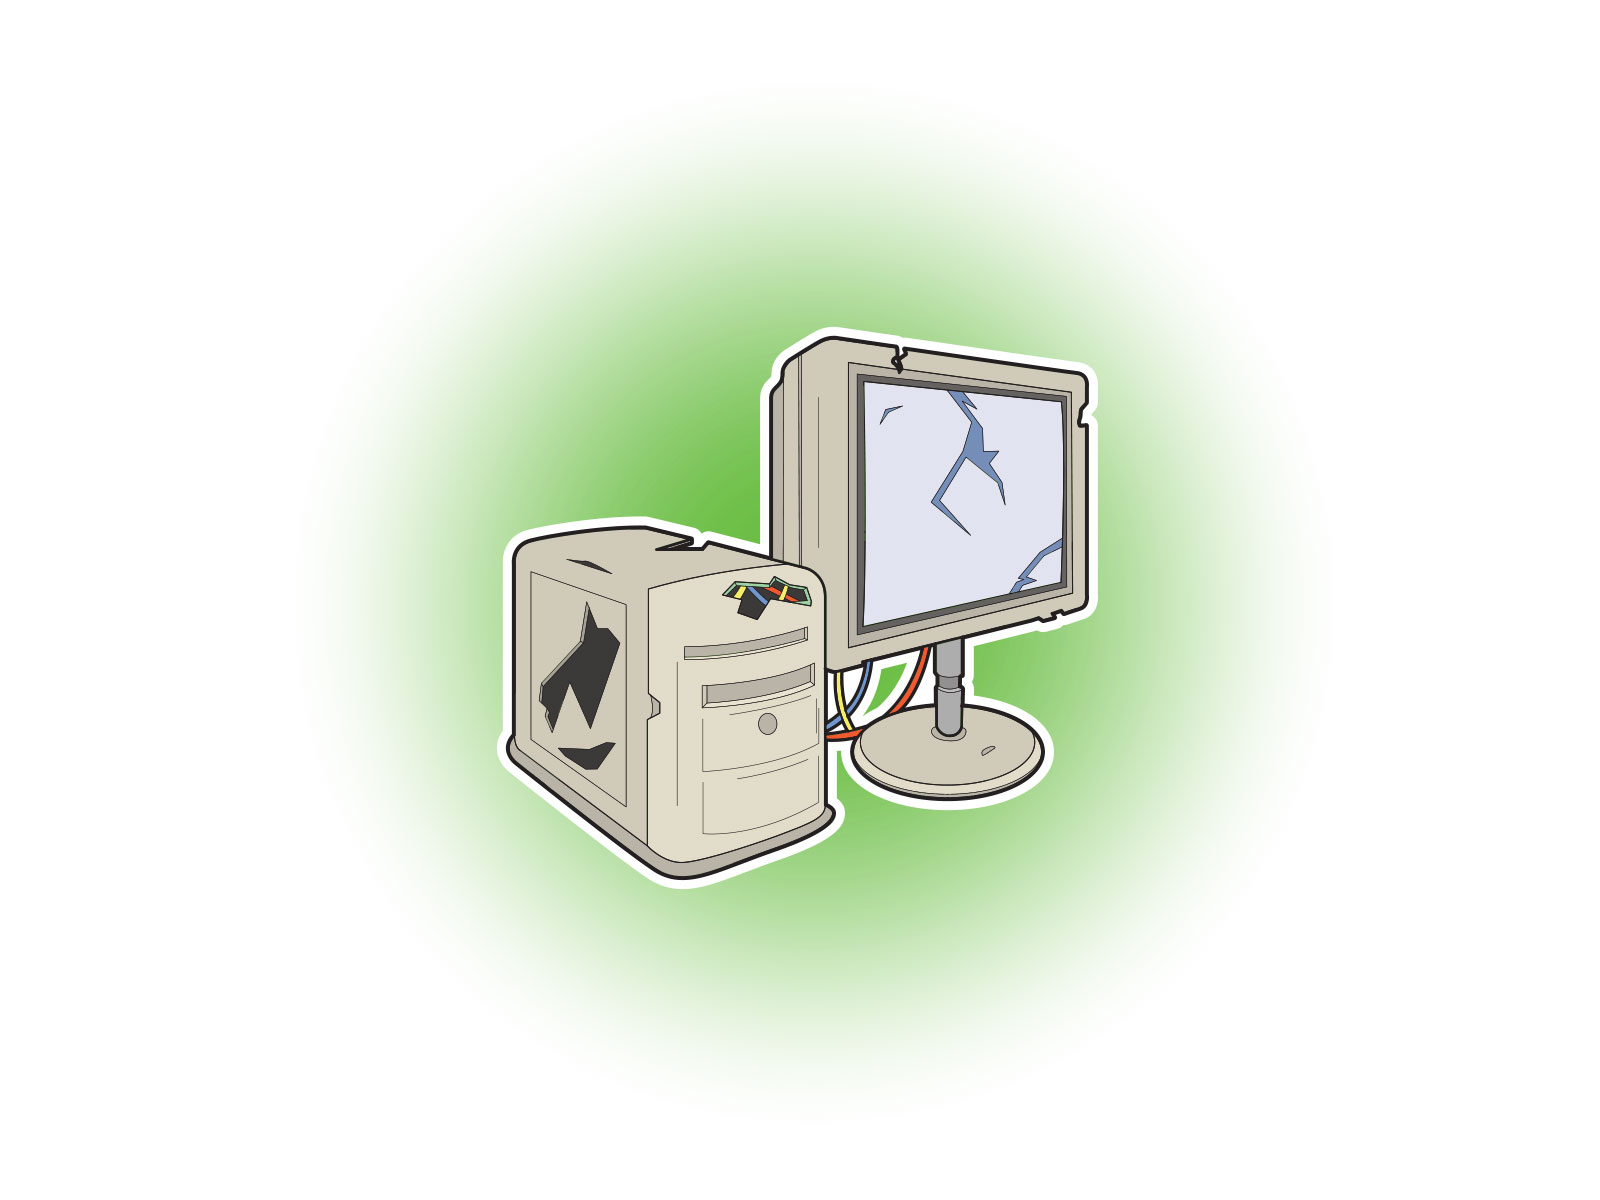 Stylised vector icon illustration of an old broken computer